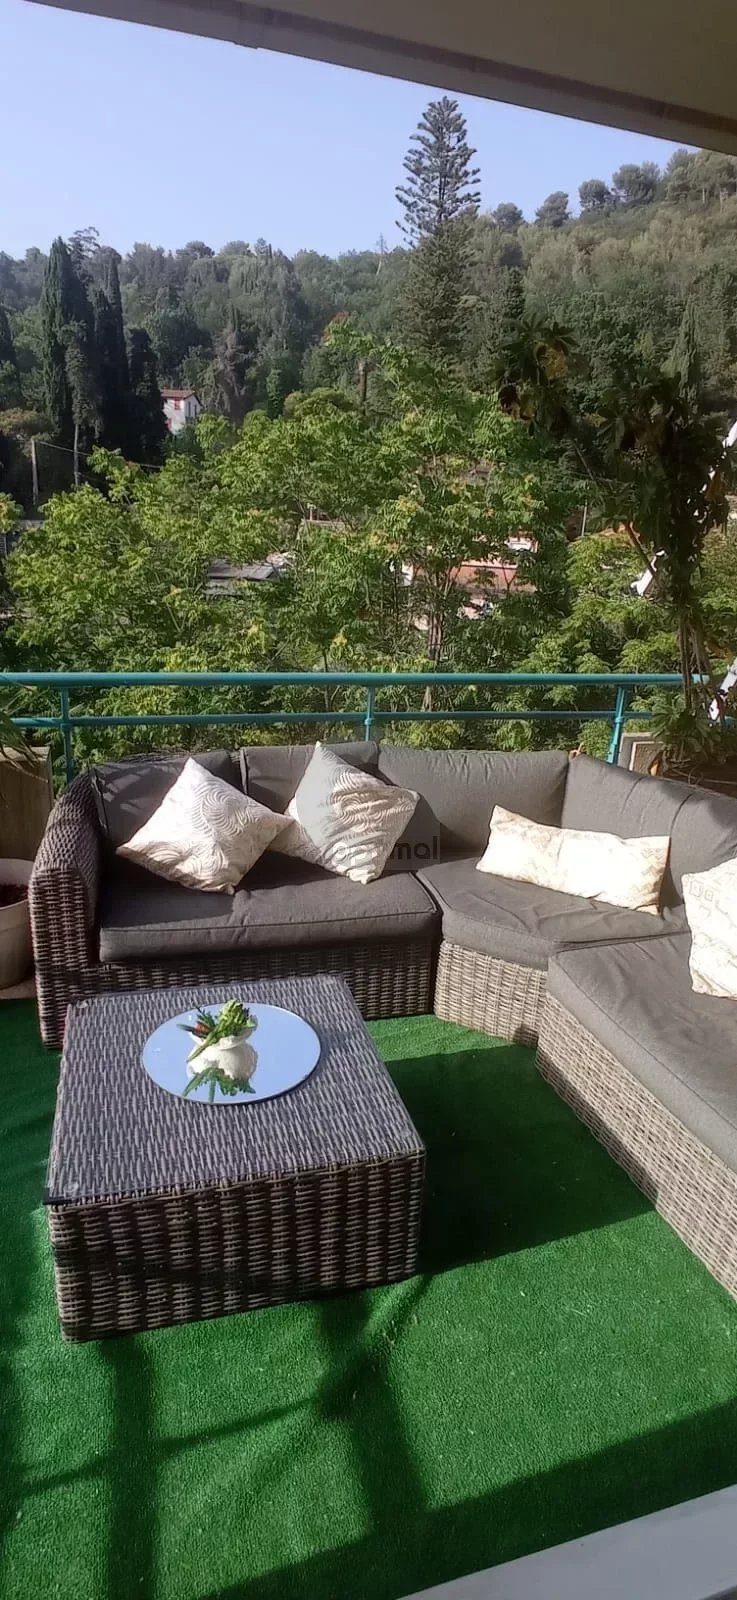 ROQUEBRUNE CAP-MARTIN: BEAUTIFUL APARTMENT WITH TERRACE - RESIDENCE WITH SWIMMING POOL